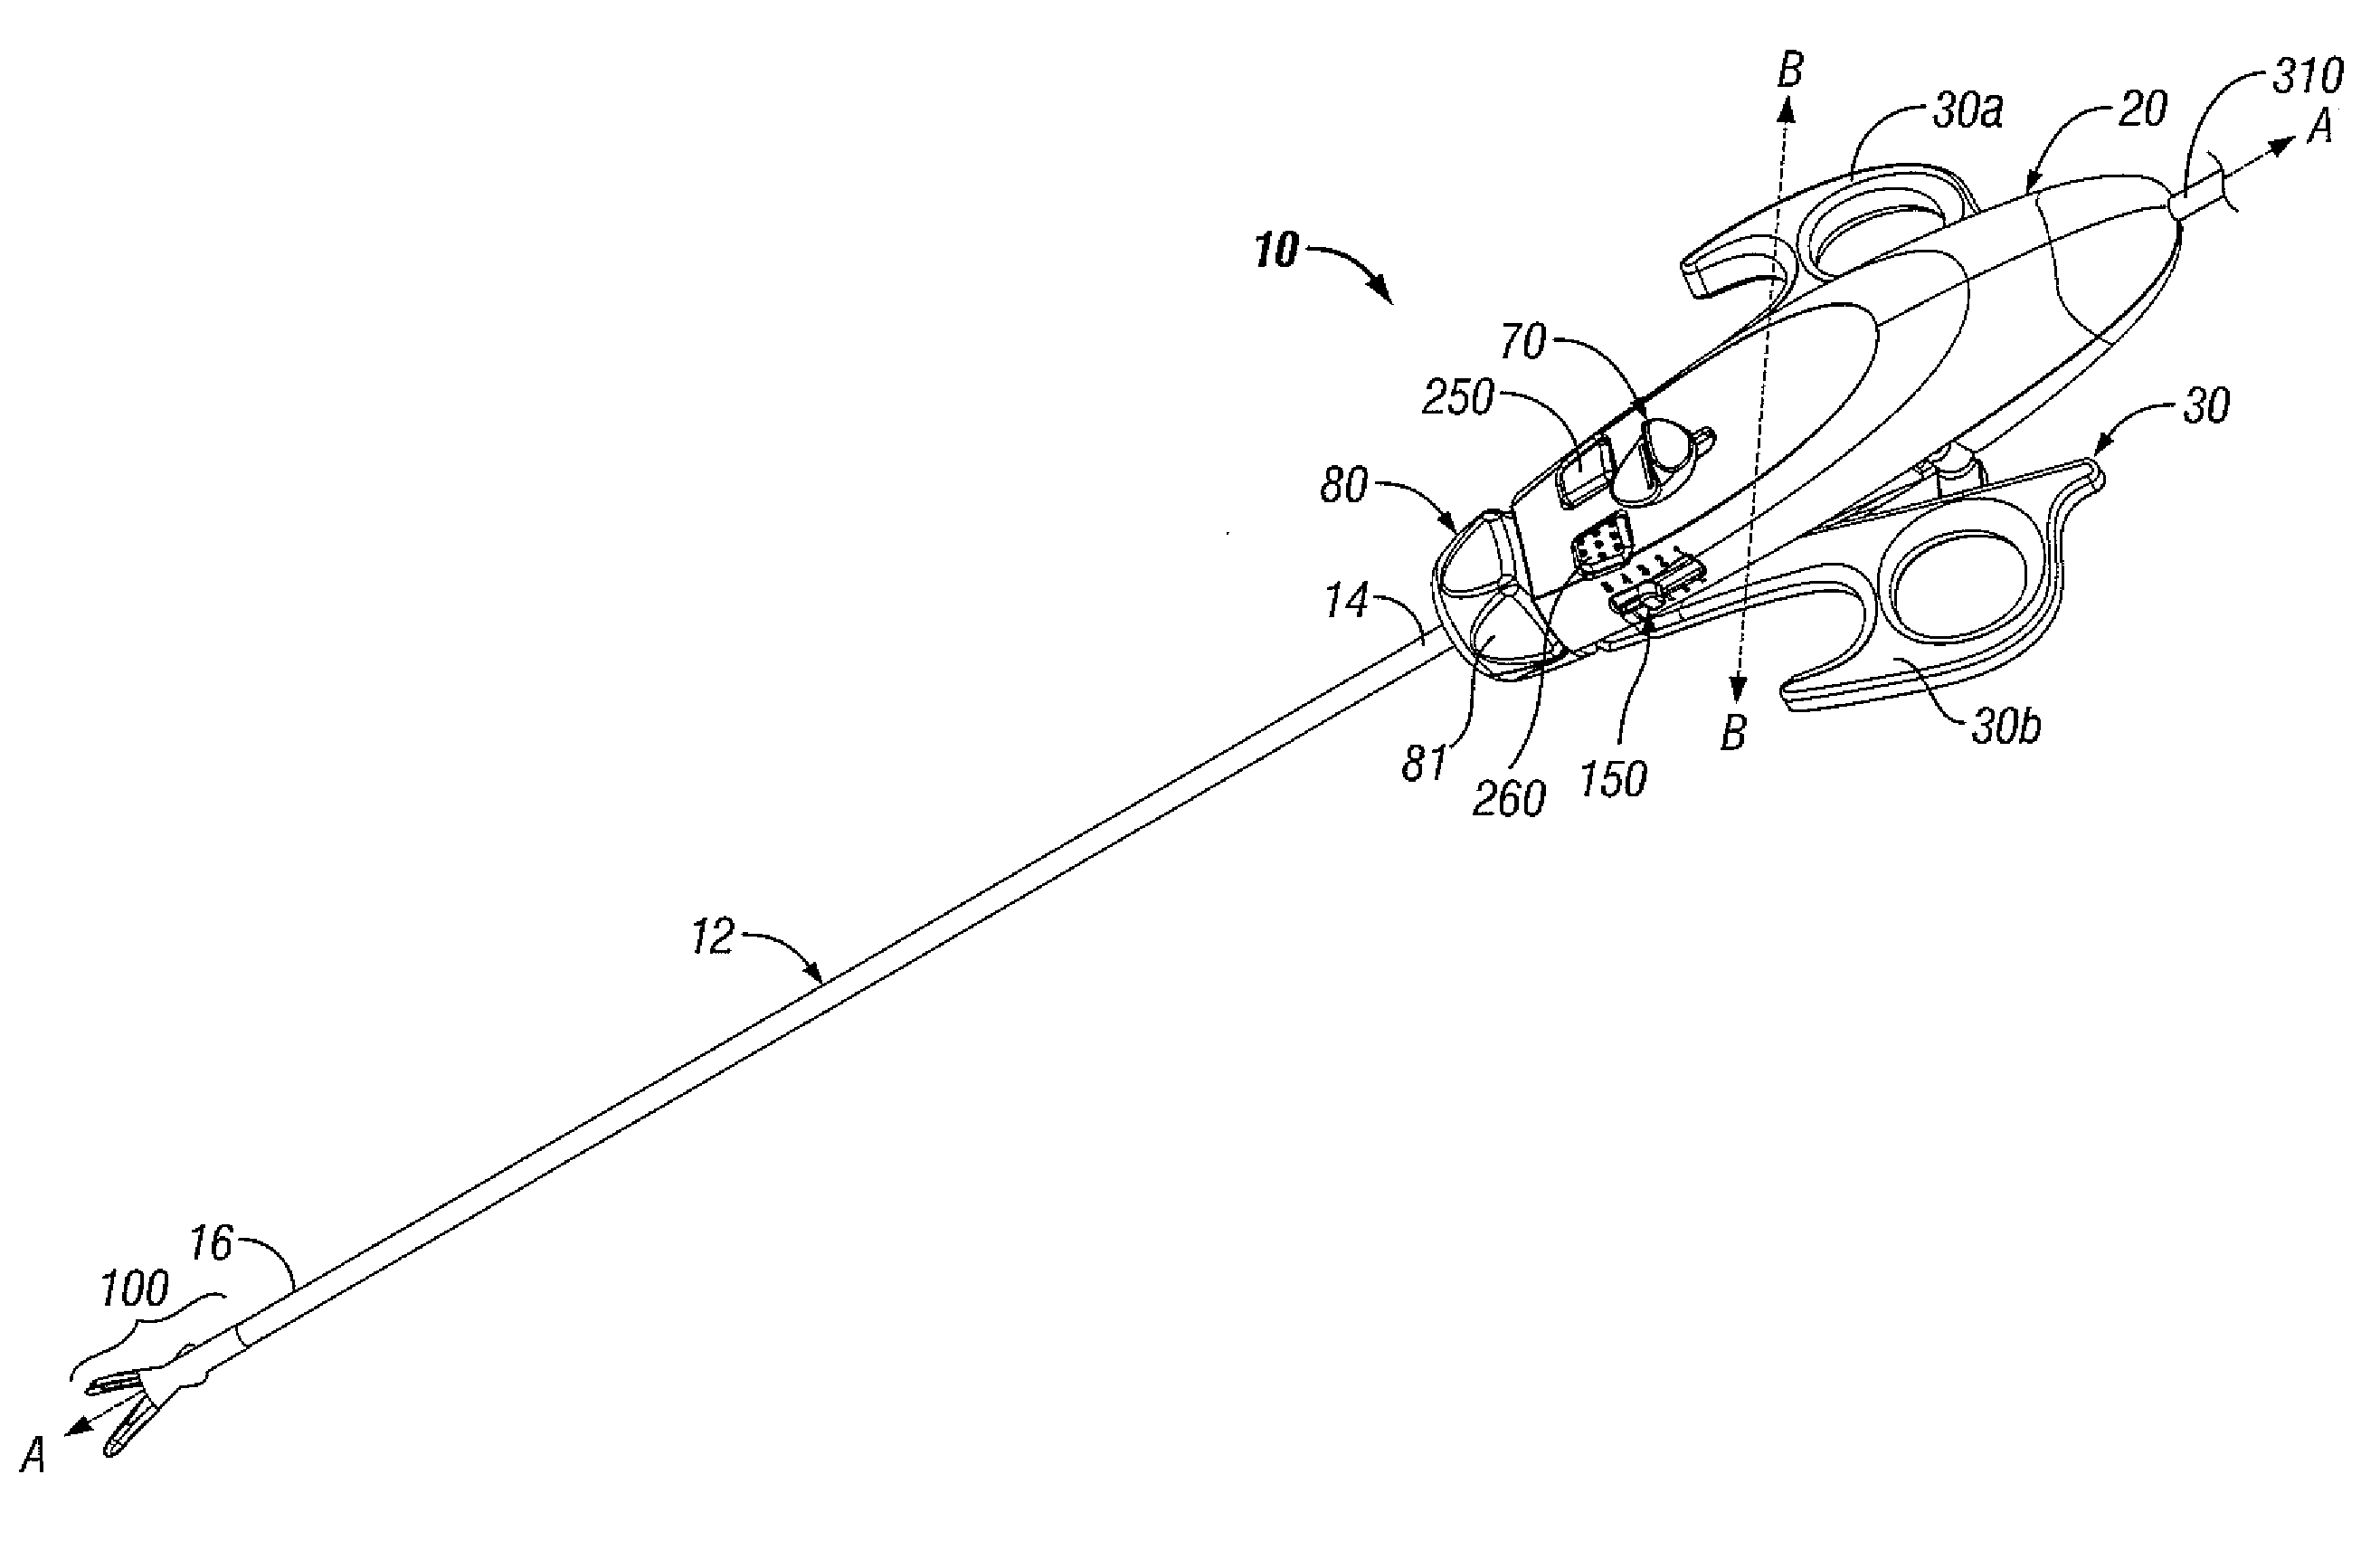 Insulating Mechanically-Interfaced Boot and Jaws for Electrosurgical Forceps